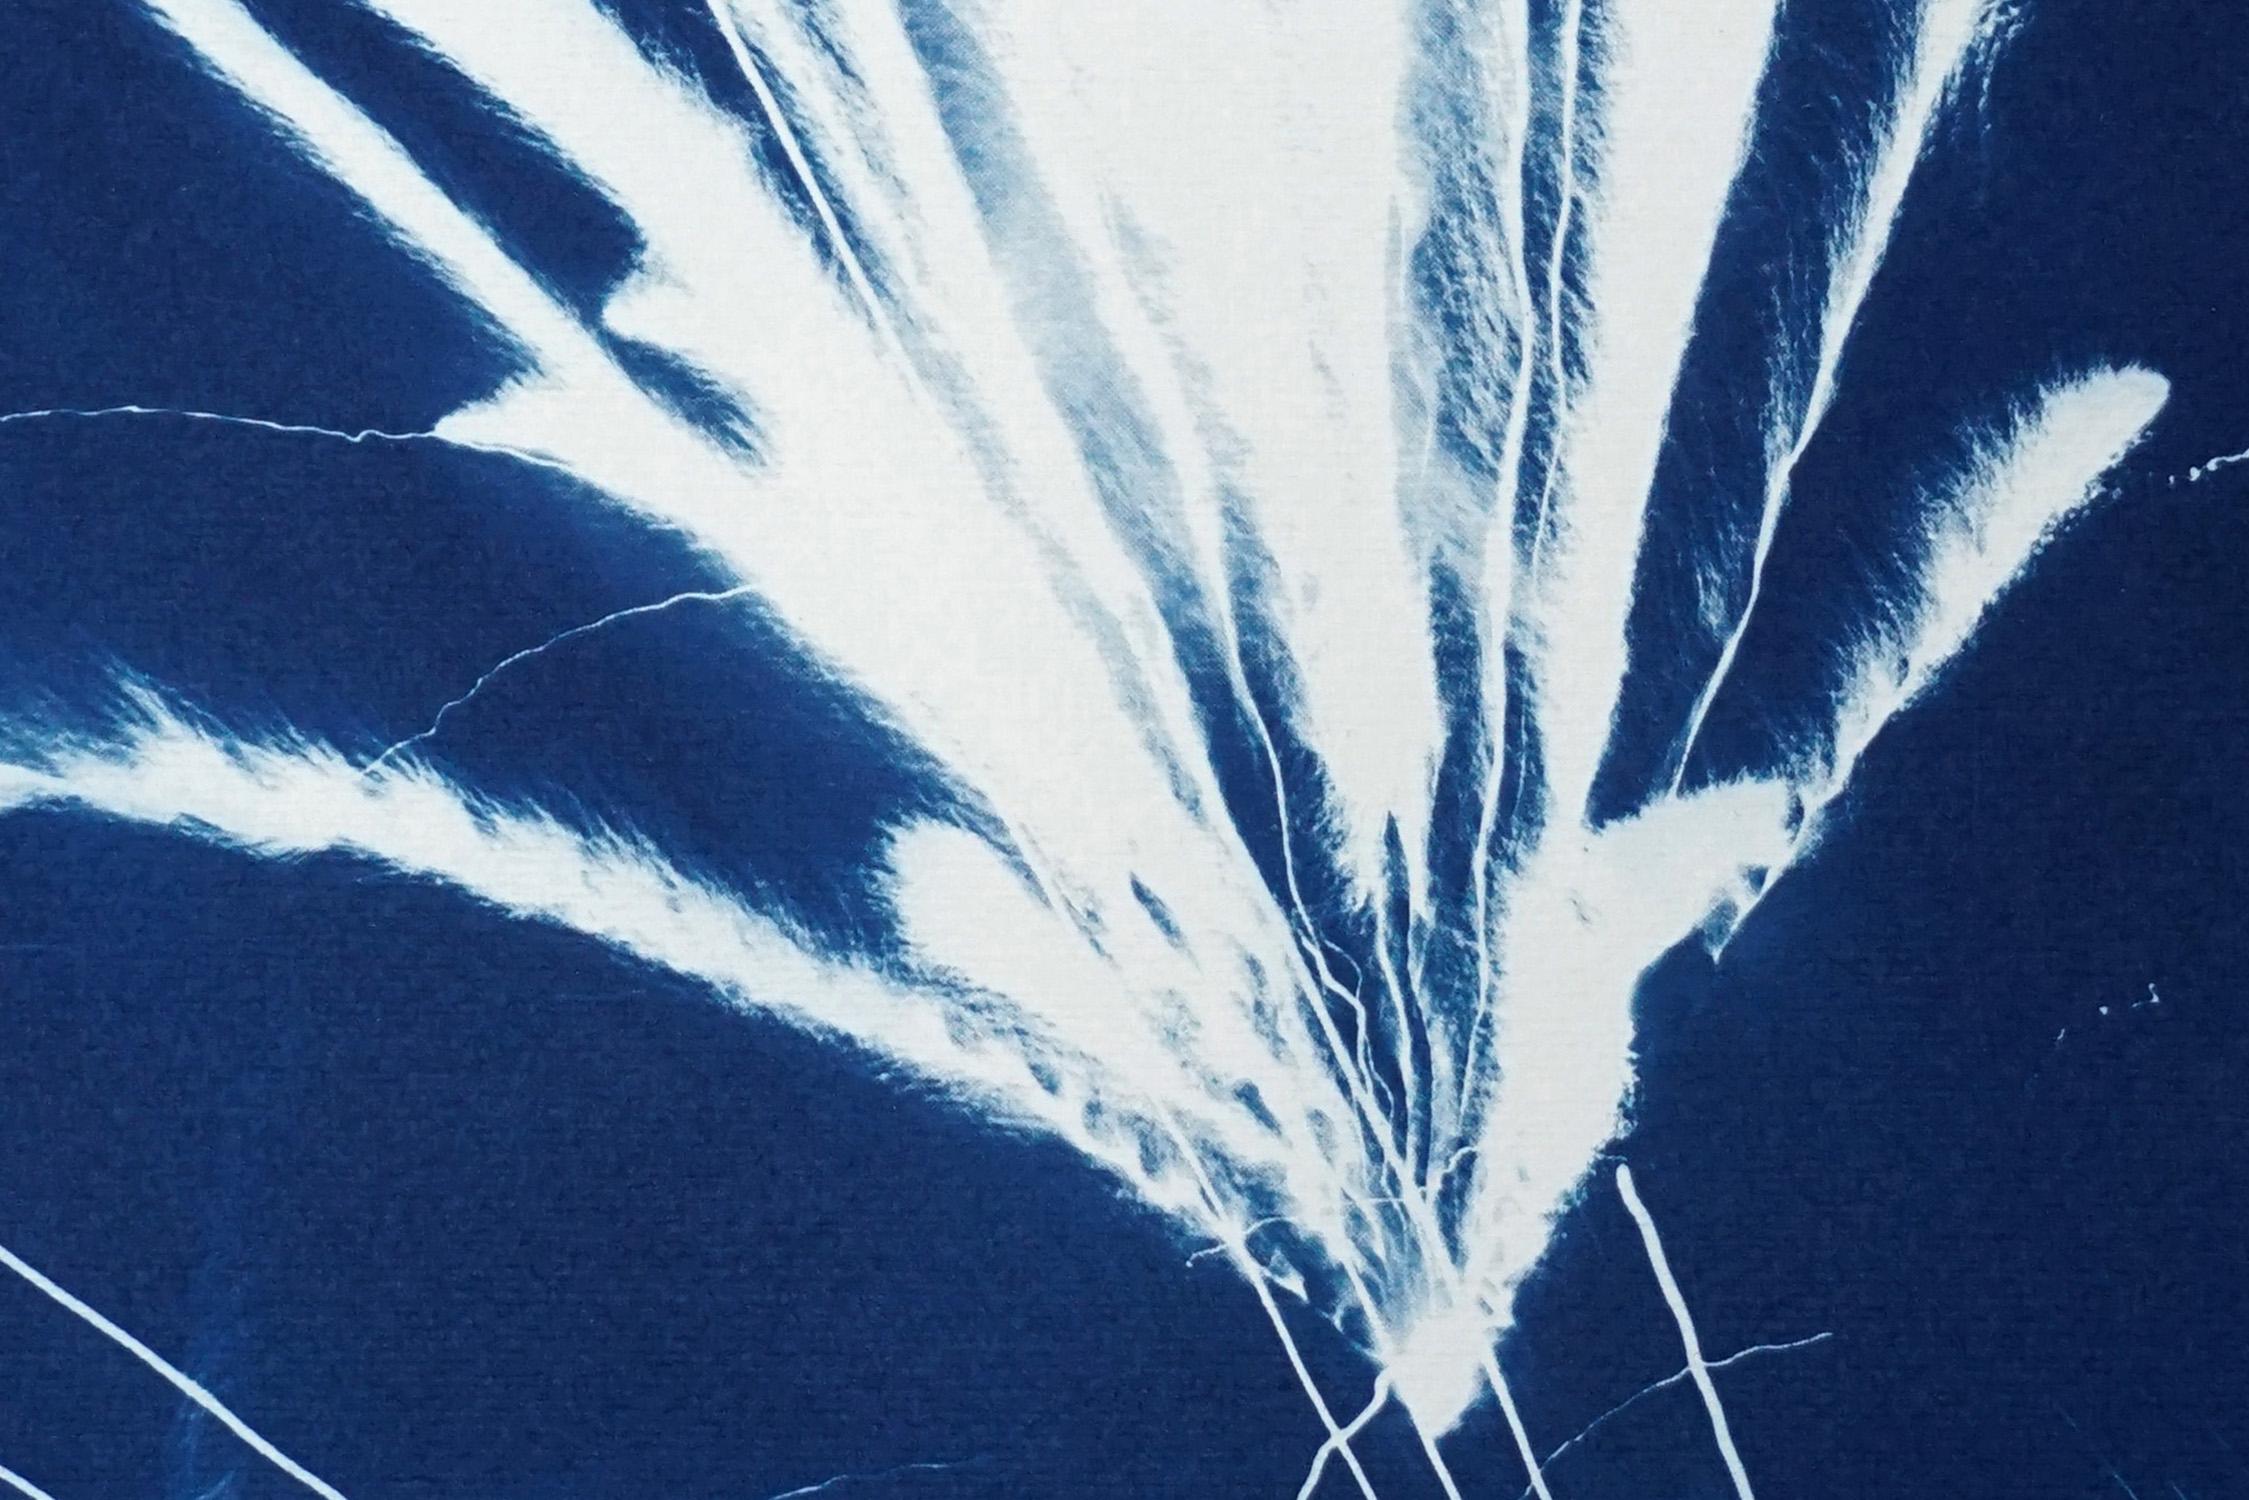 Gestual Silhouette of Sparkling Firework Burst, Nocturnal Deep Blue Cyanotype  - Abstract Print by Kind of Cyan